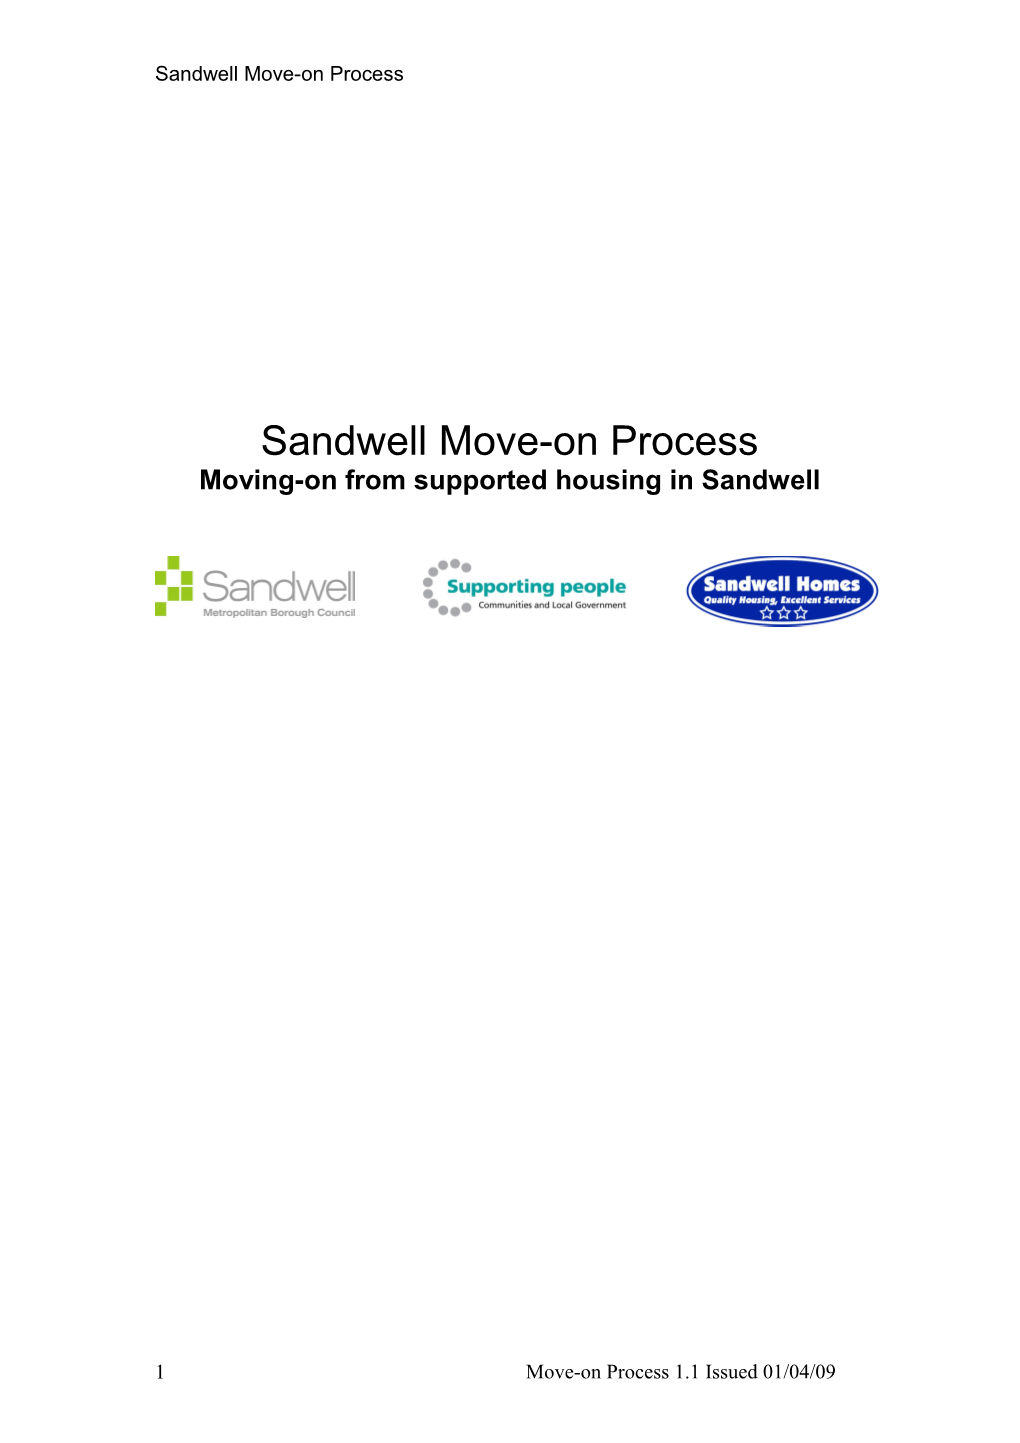 Moving-On in Sandwell